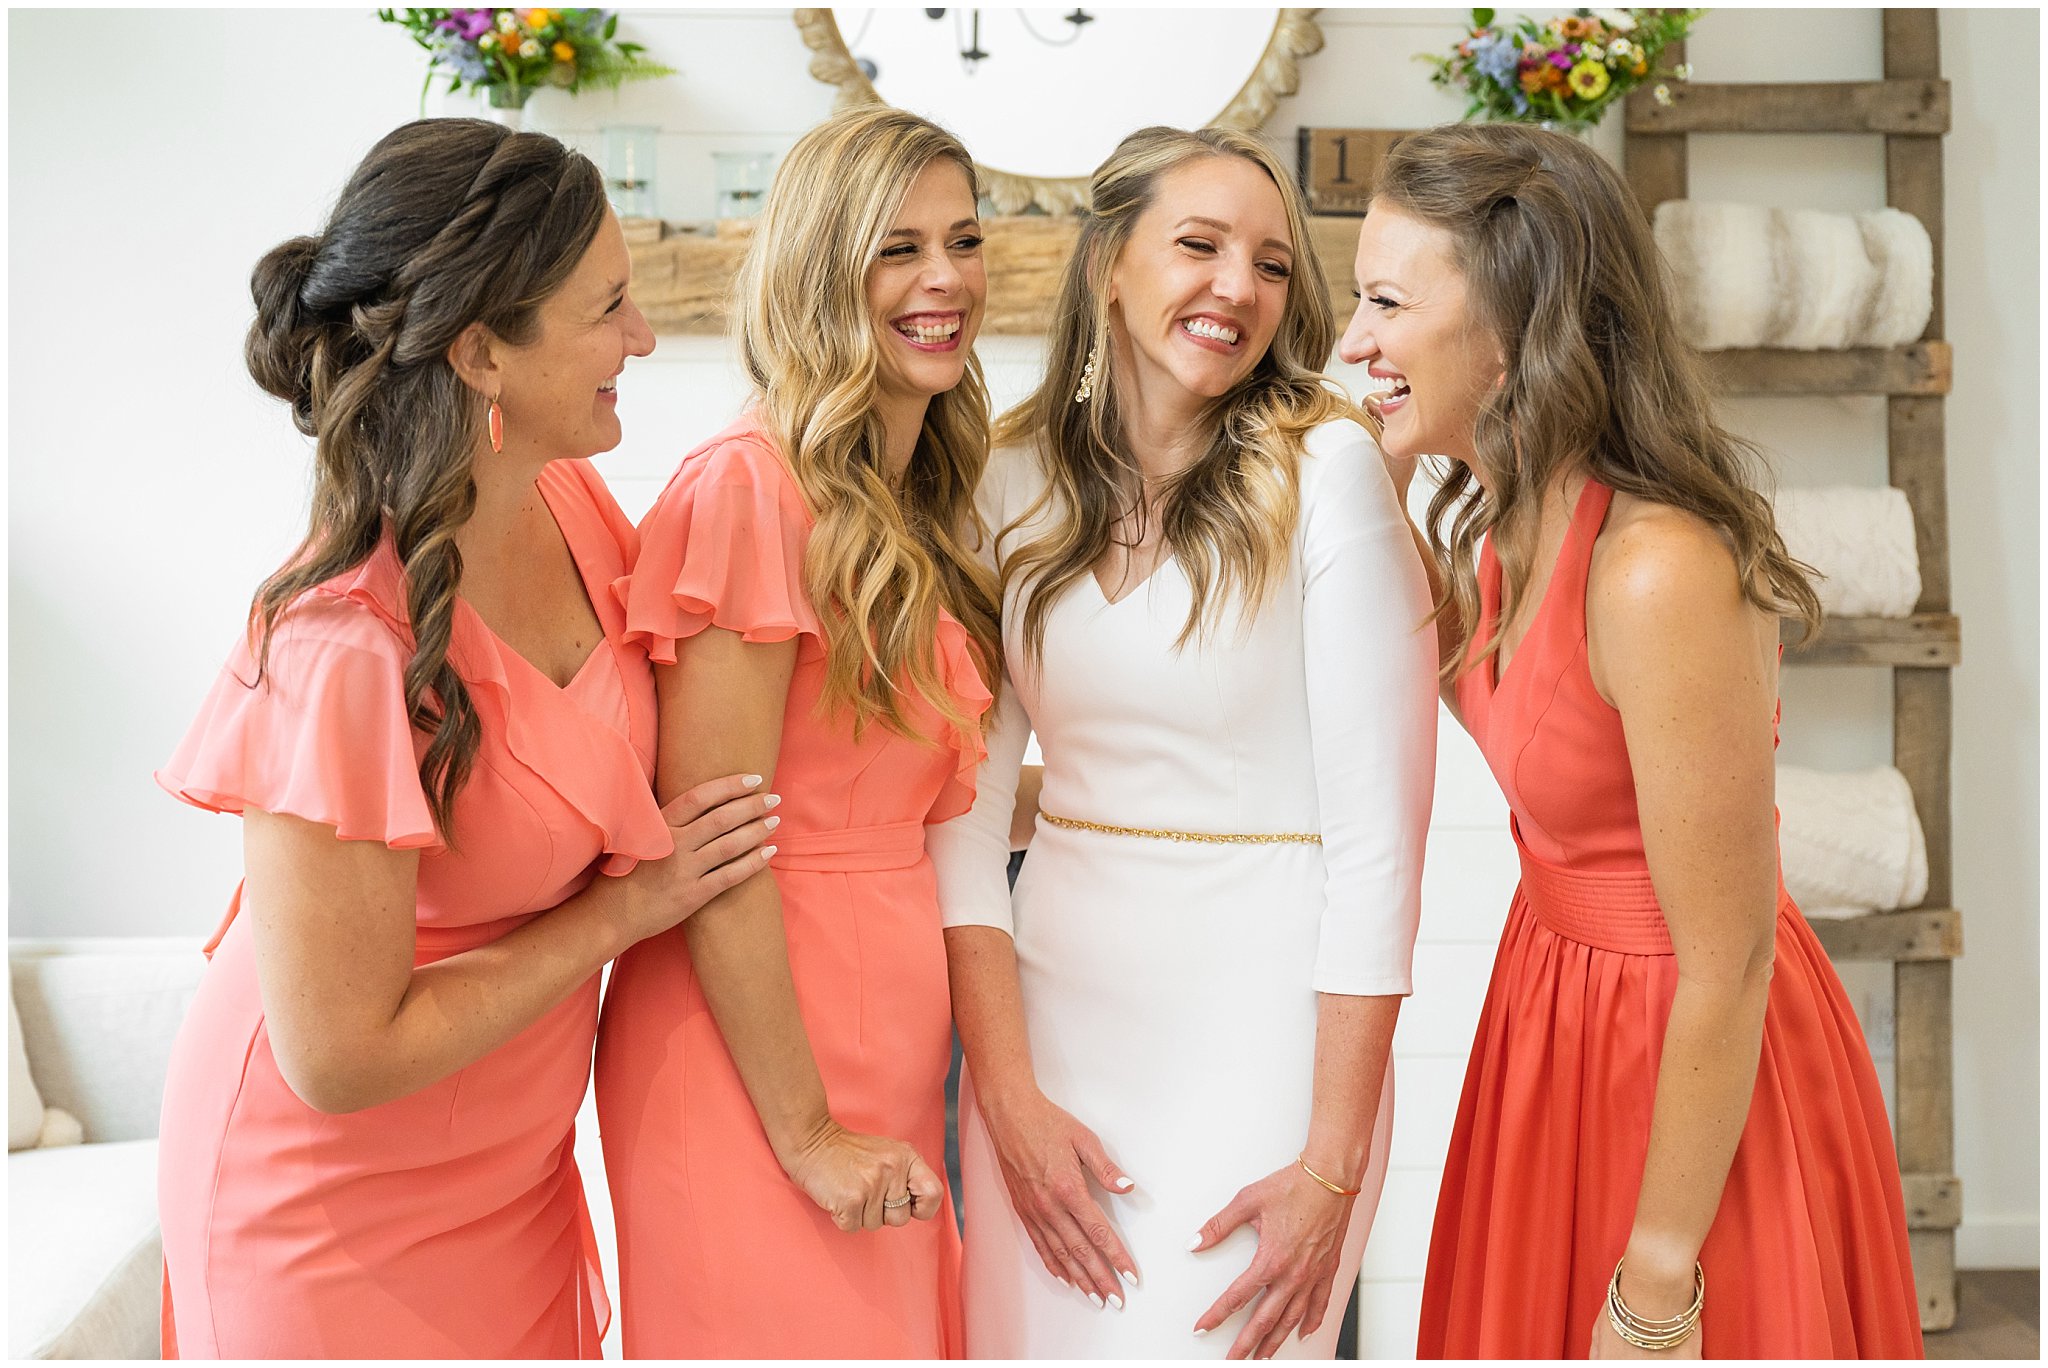 Bride with bridesmaids getting ready inside modern cabin in coral pink dresses | Mountainside Weddings Kalispell Montana Destination Wedding | Jessie and Dallin Photography